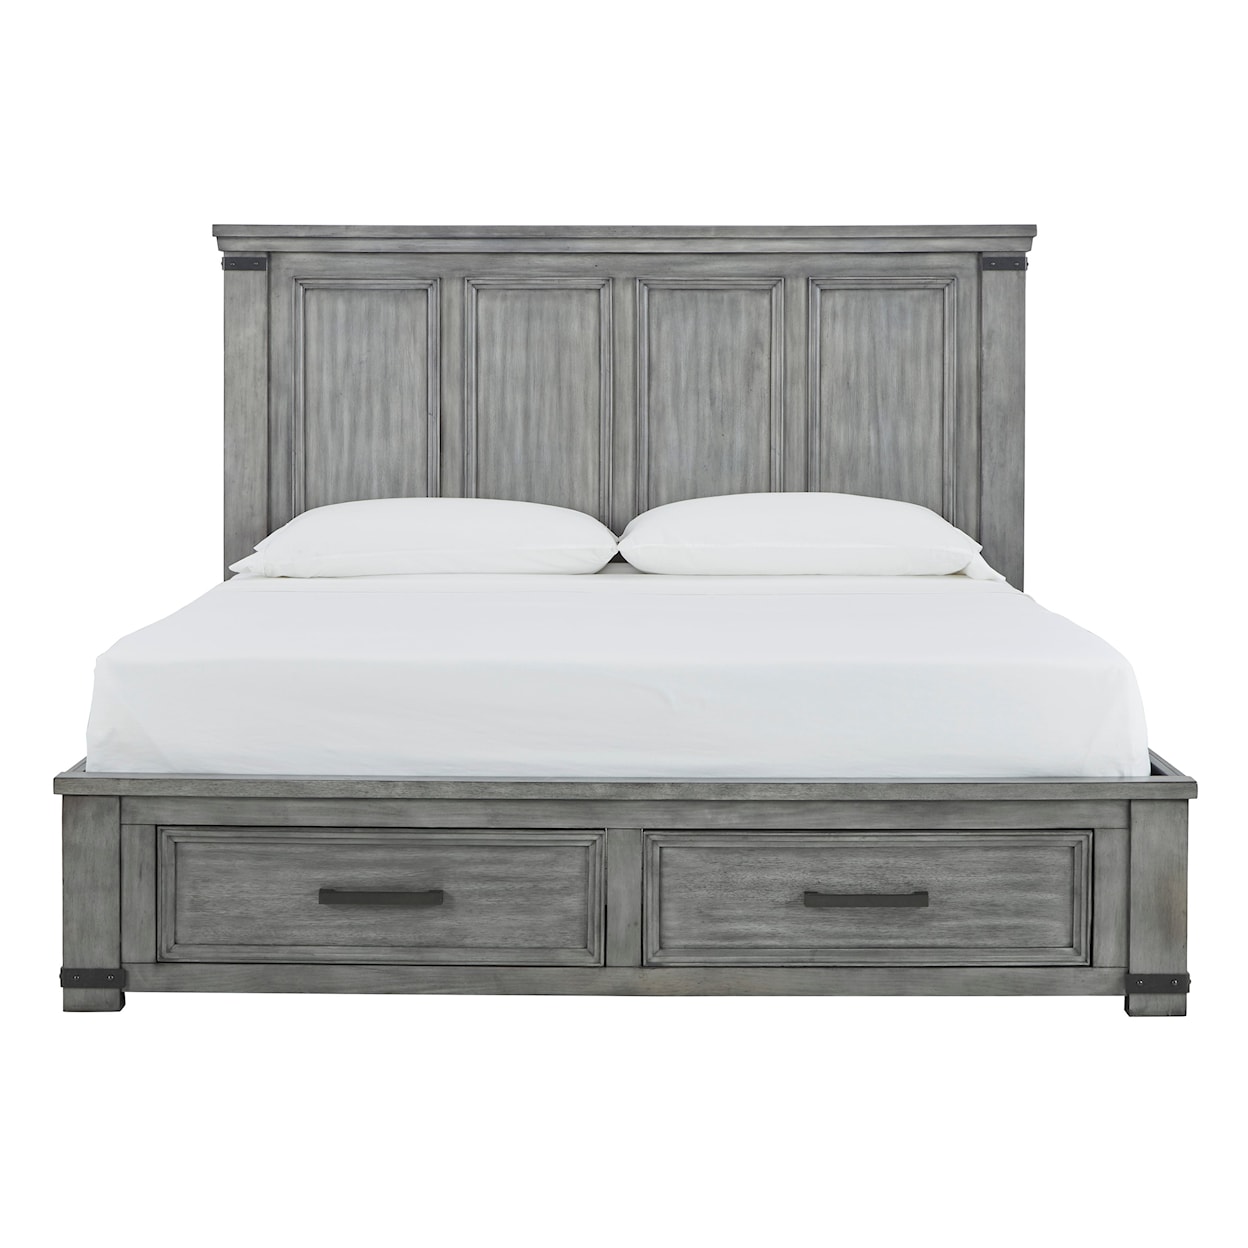 Signature Design Russelyn King Storage Bed